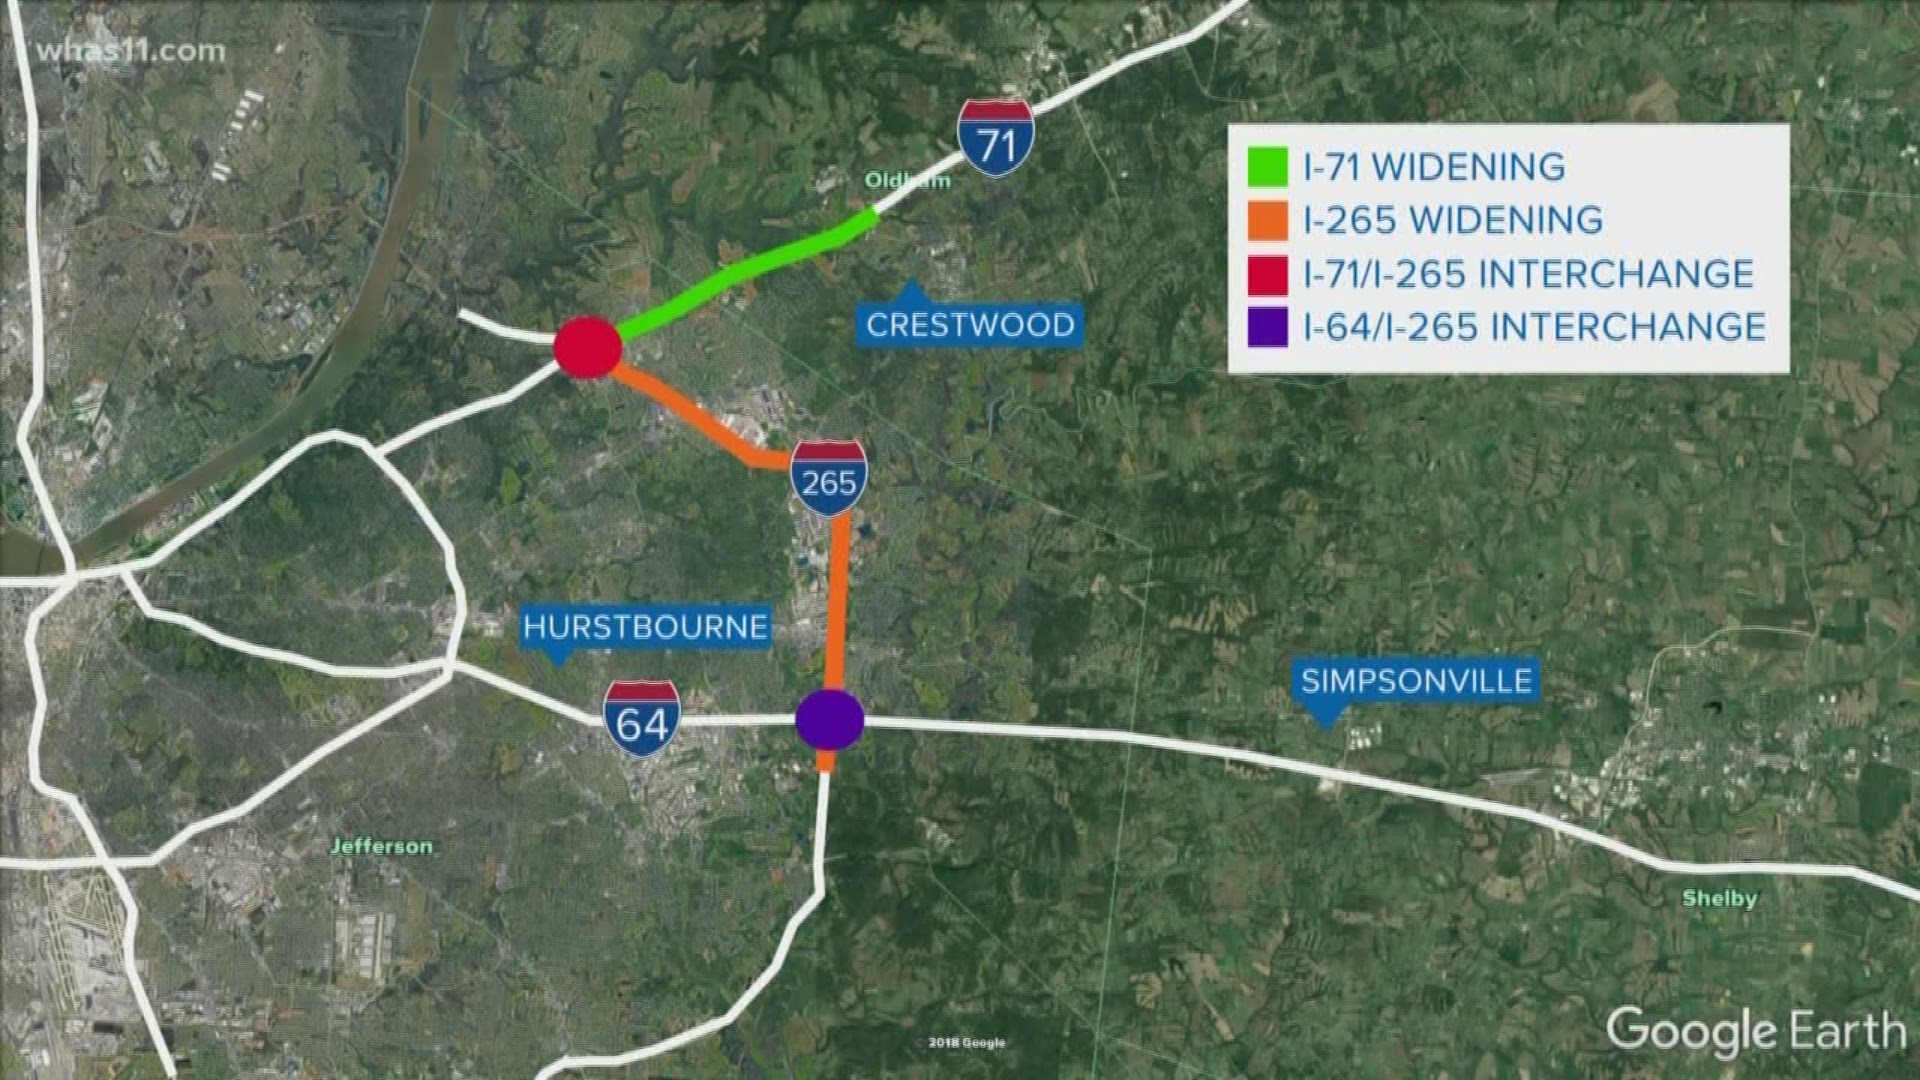 An $180 million project aims to relieve traffic congestion on I-265 and I-71.